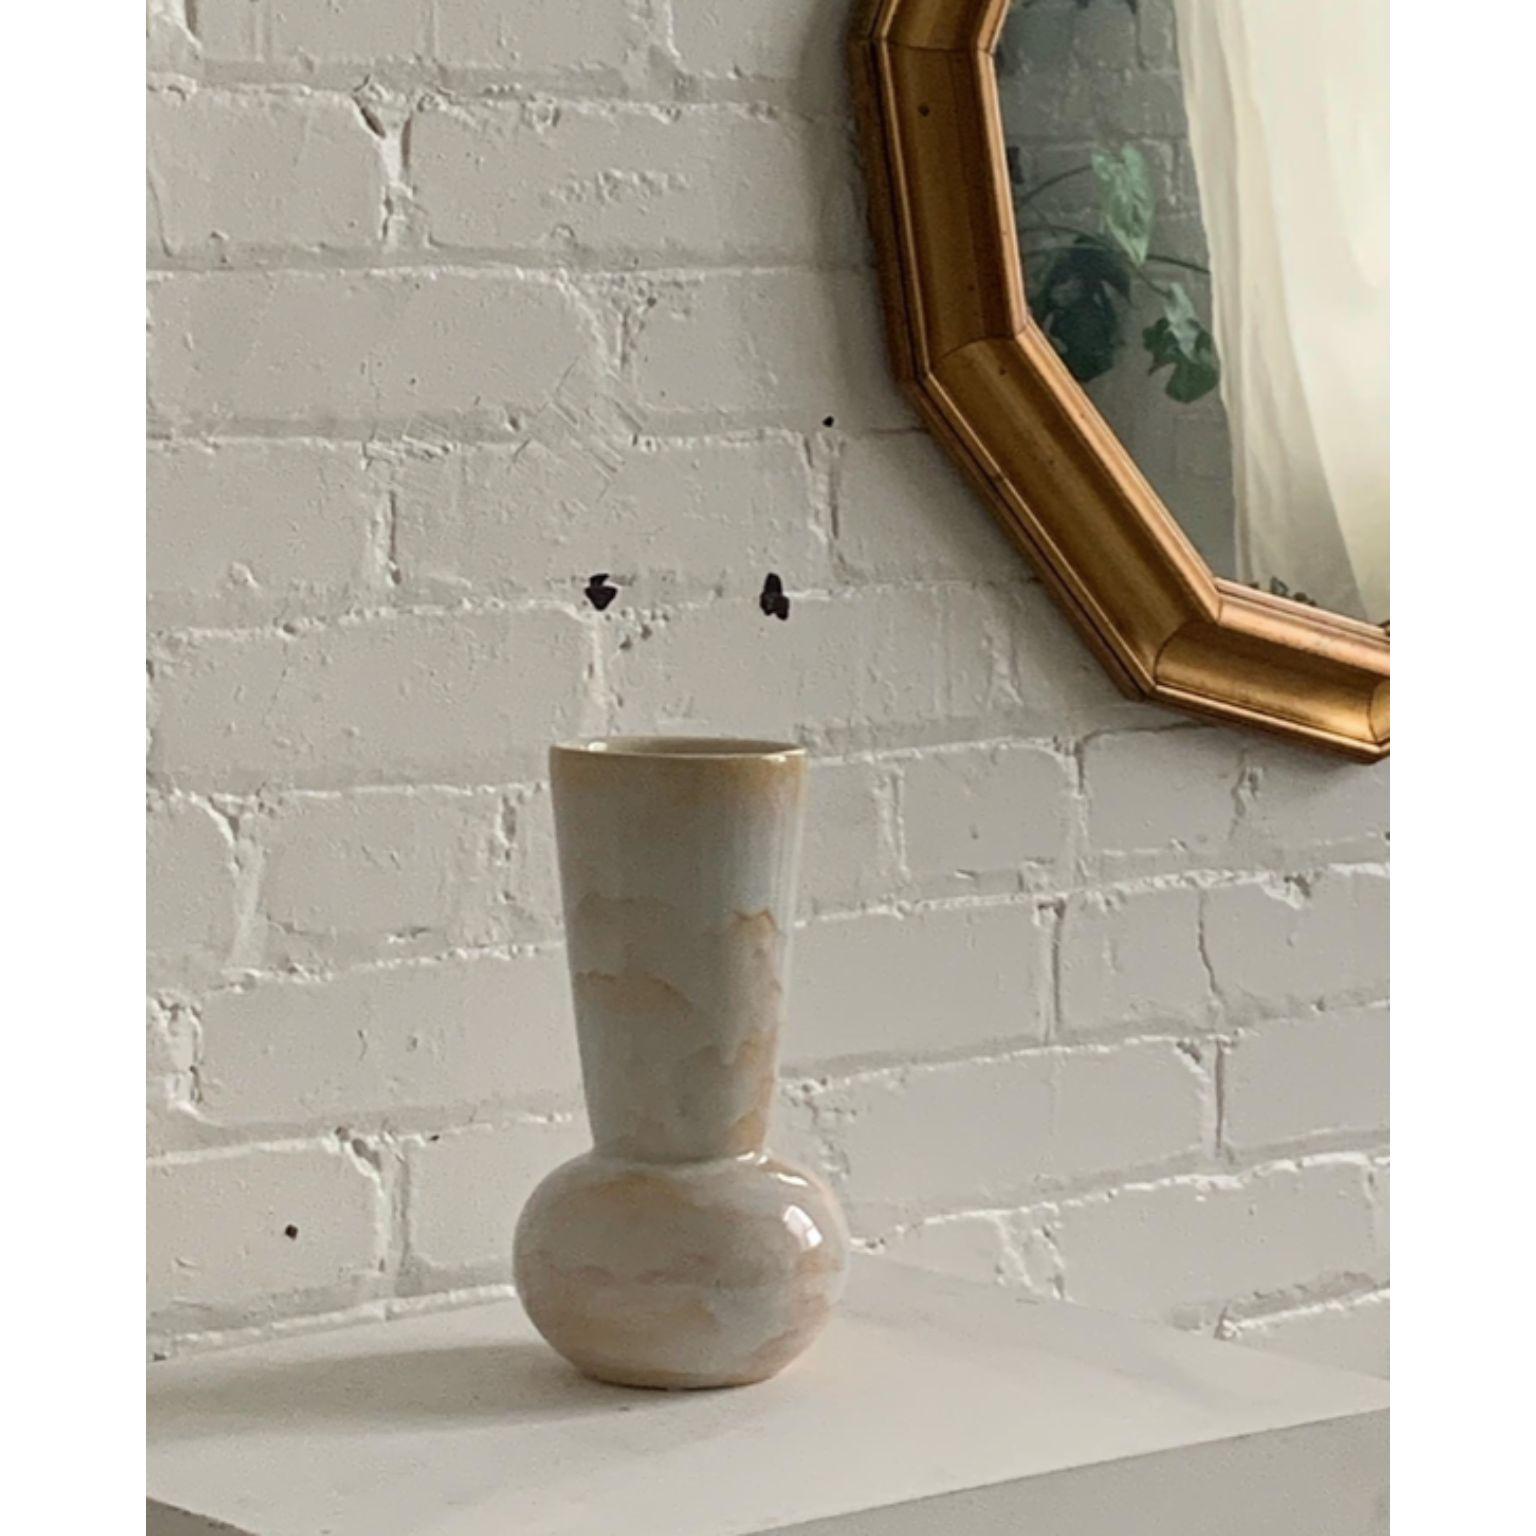 Cloud Vase by Solem Ceramics
Dimensions: D 13 x W 13 x H 33 cm.
Materials: White stoneware, glaze
This vase is water safe. Please contact us.

Solem’s work pulls from memories of the architecture and community within SWANA and Southeast Asia